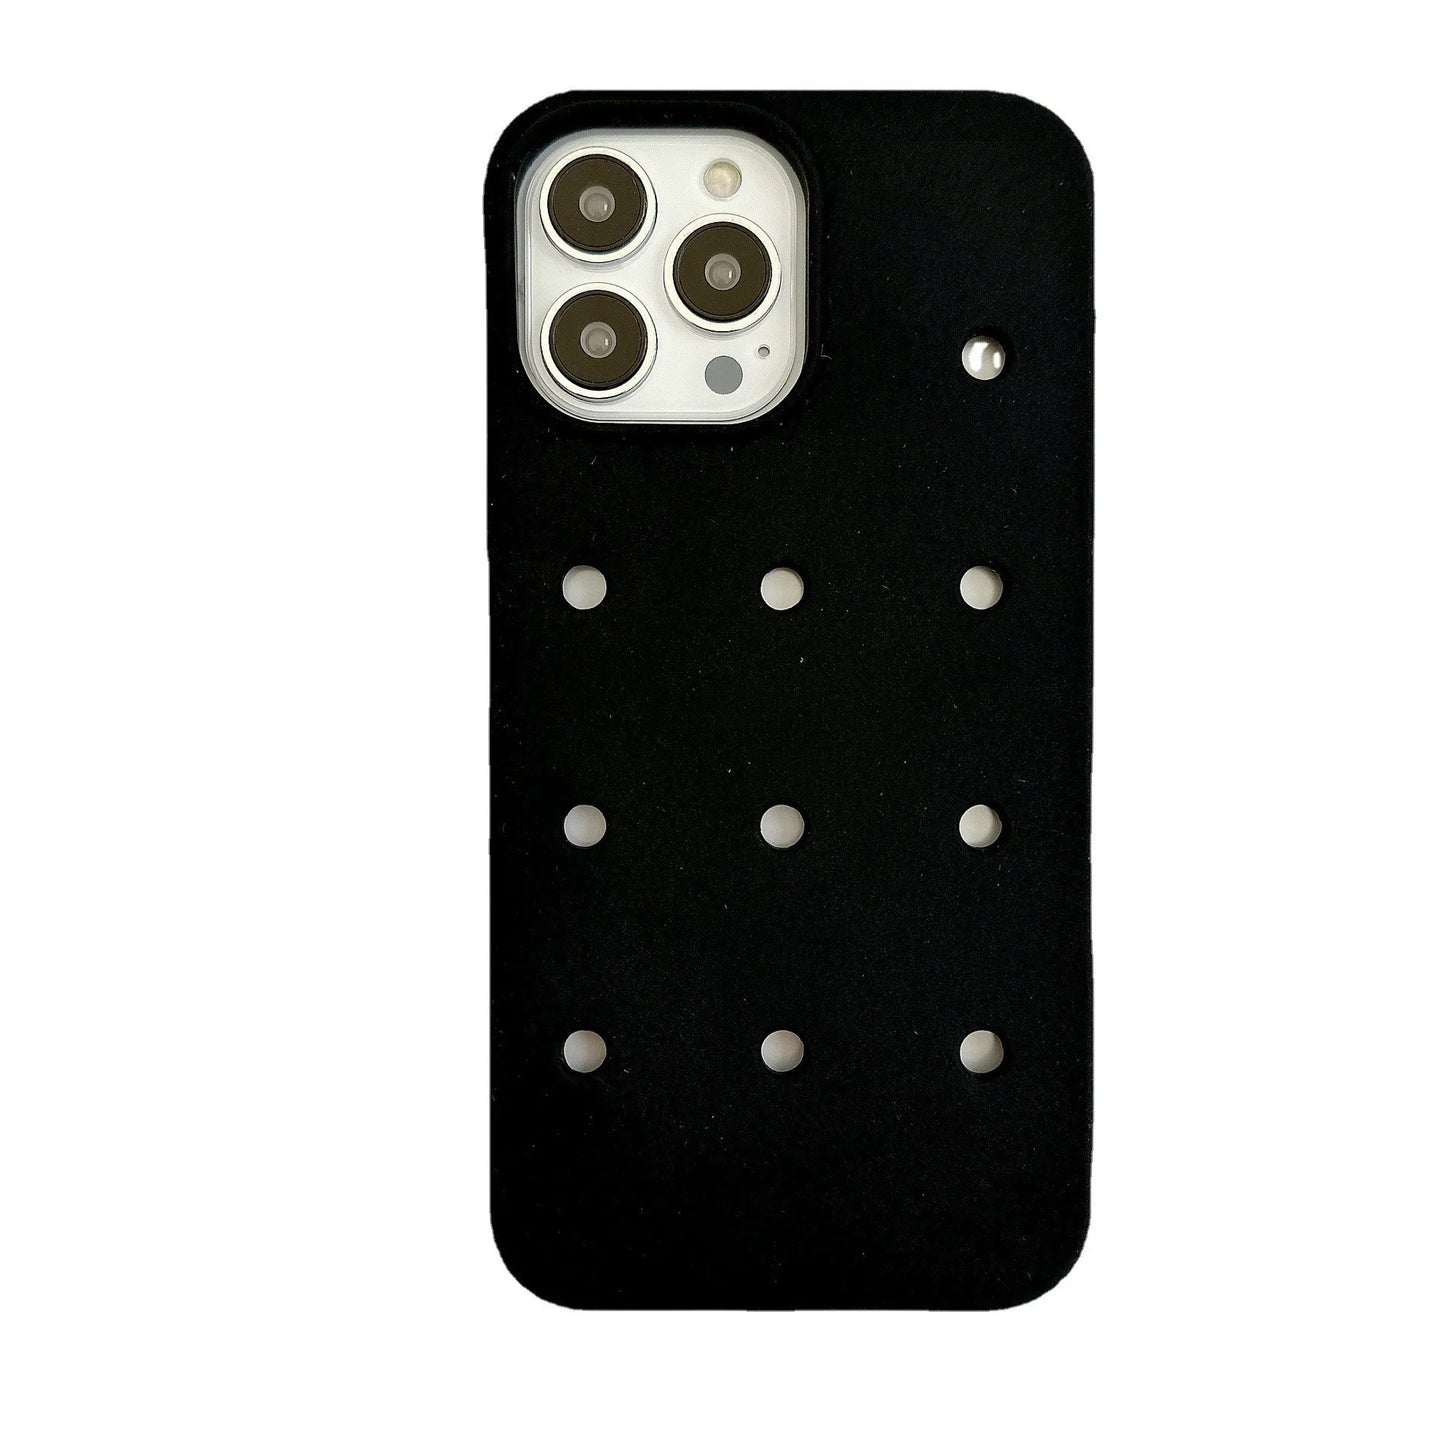 Jibbitable iPhone Silicone Case - FREE 2 Charms